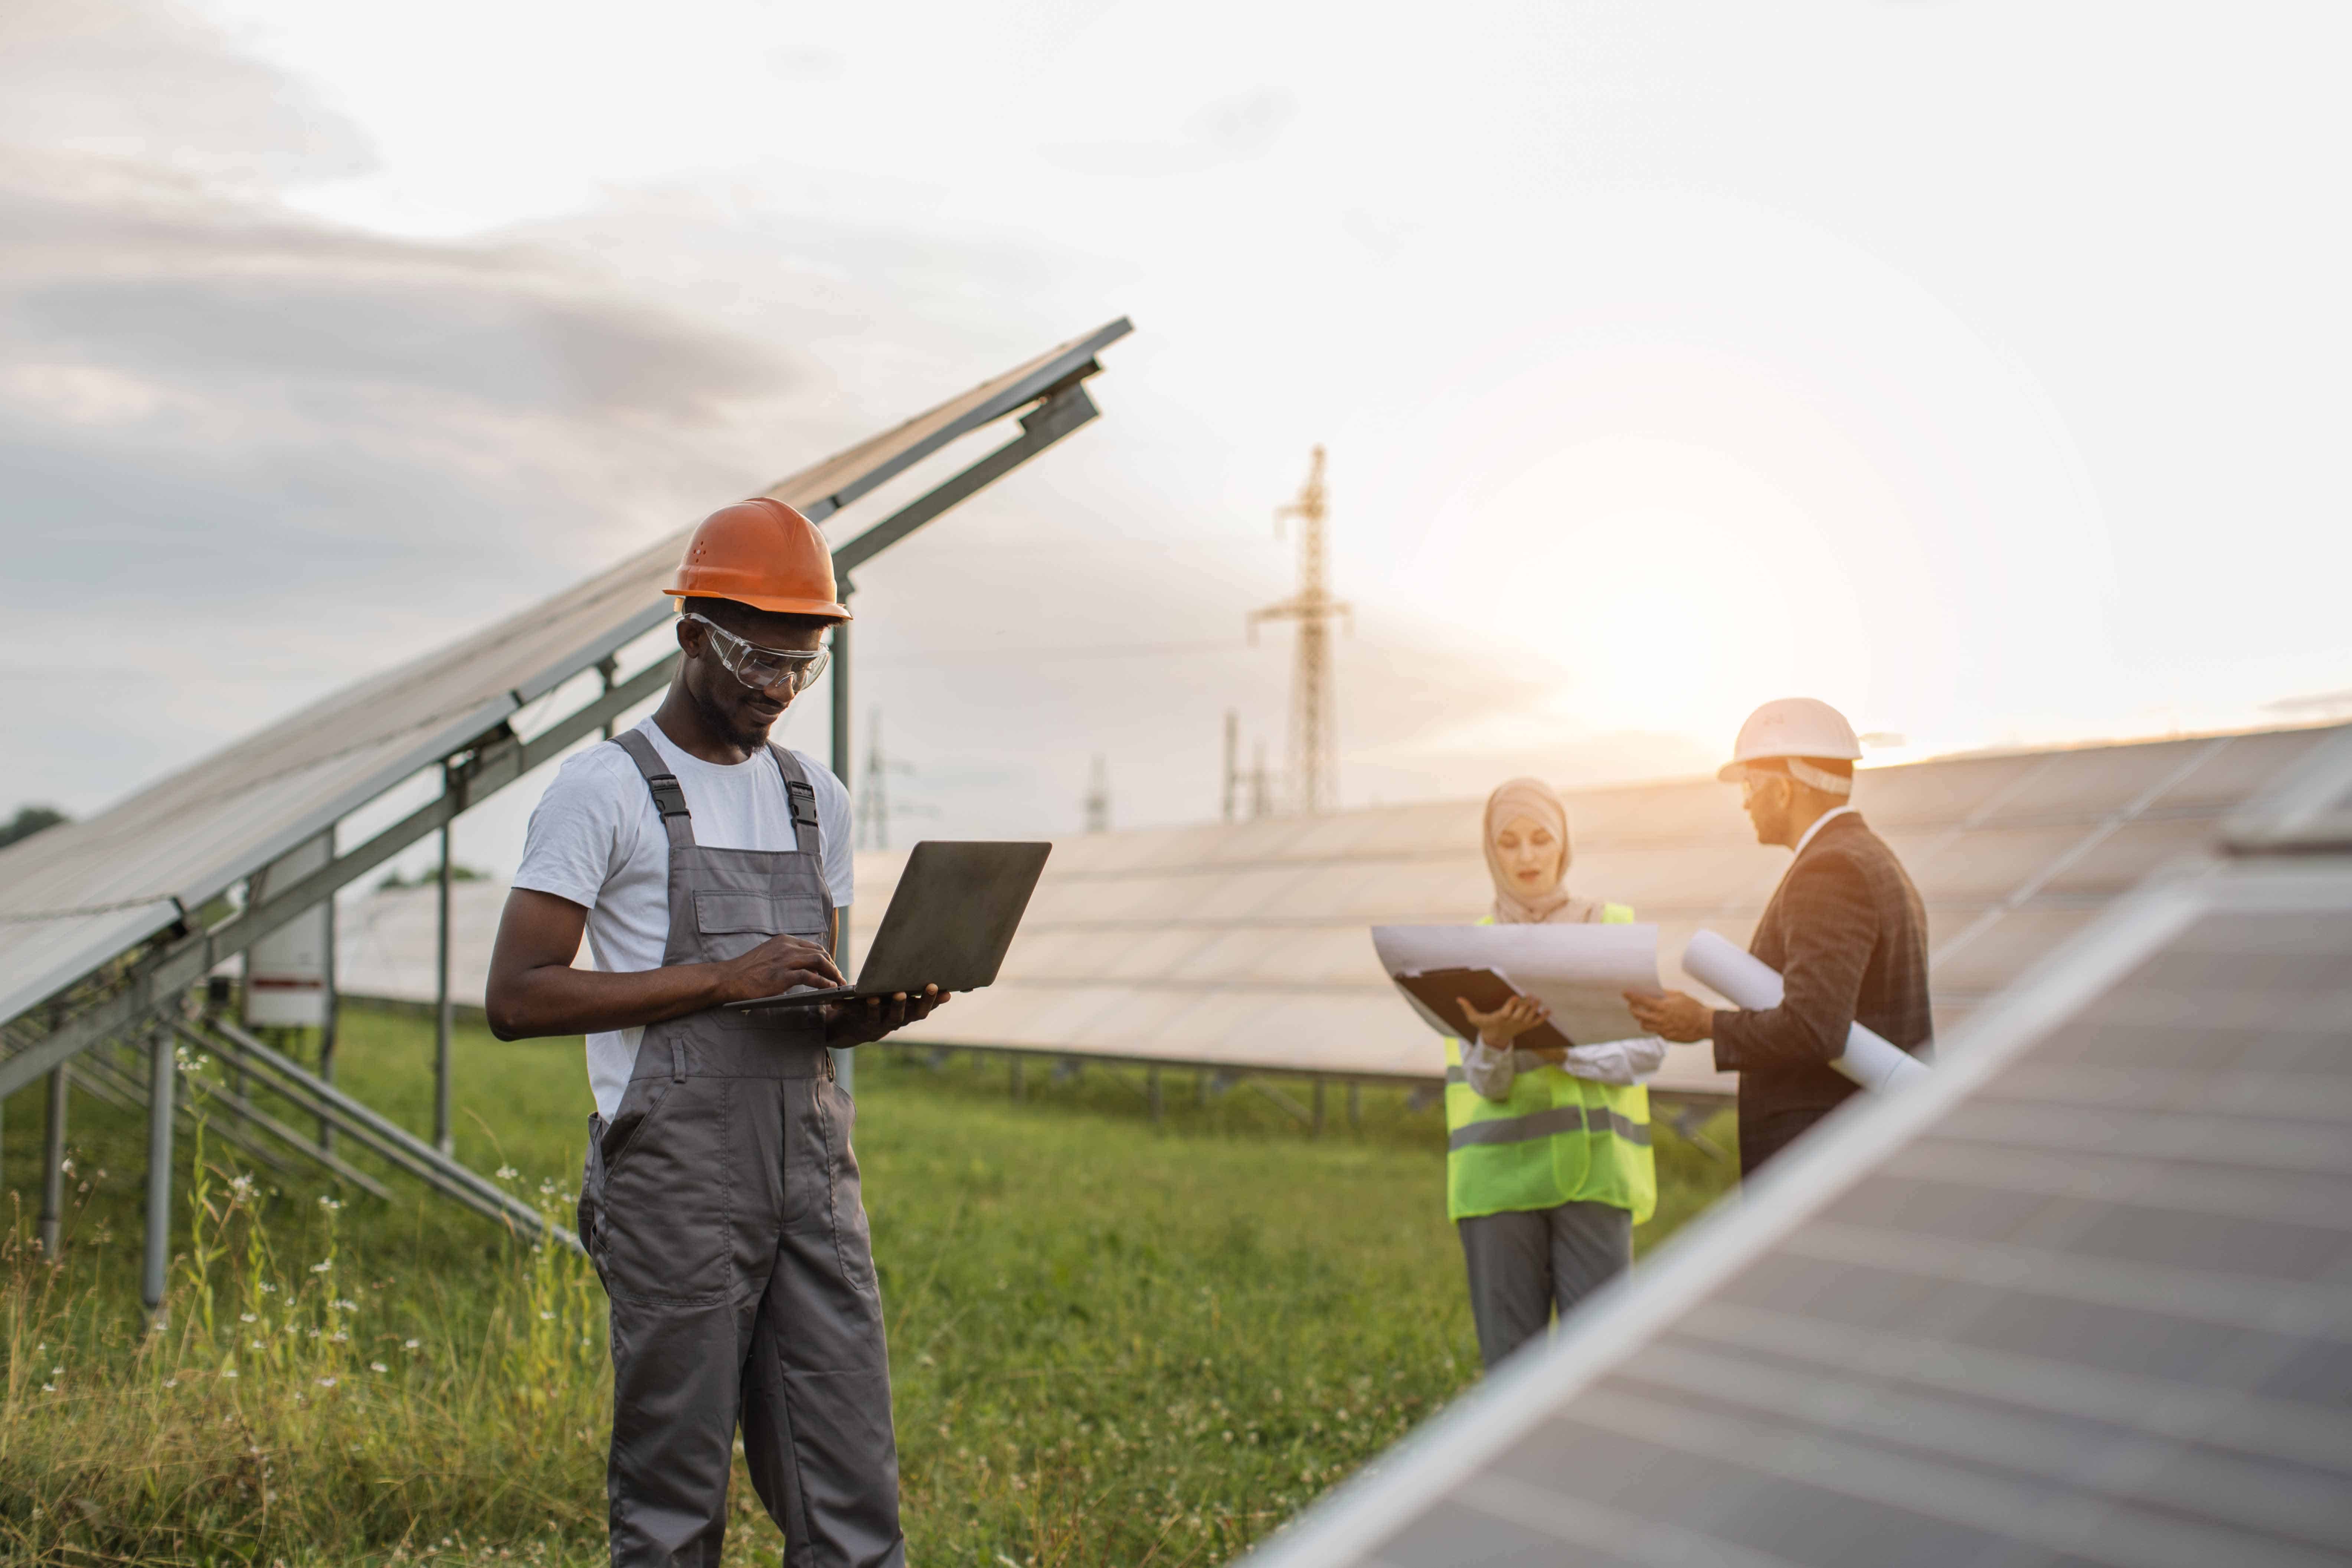 African american technician in uniform standing on field with solar panels and typing on laptop while muslim woman and indian man working with blueprints behind. Alternative energy concept.